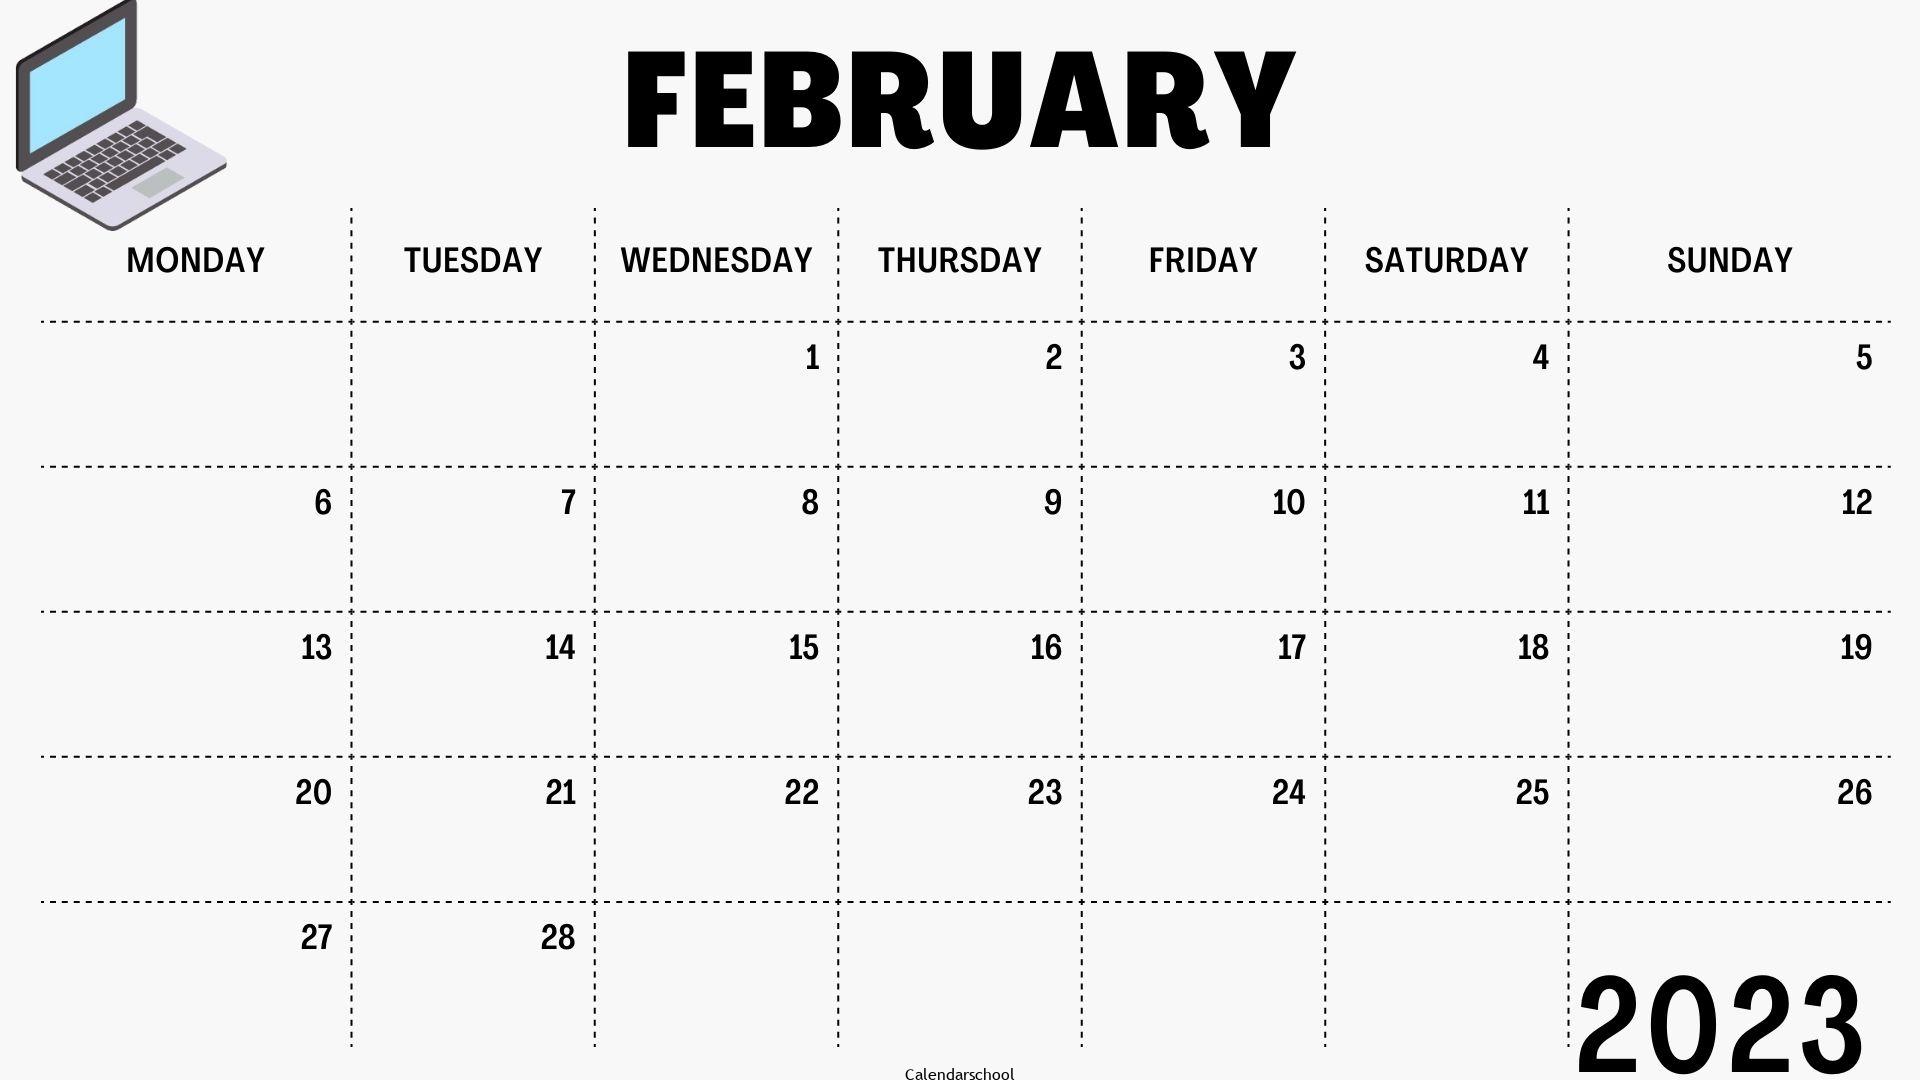 February Calendar 2023 With Notes